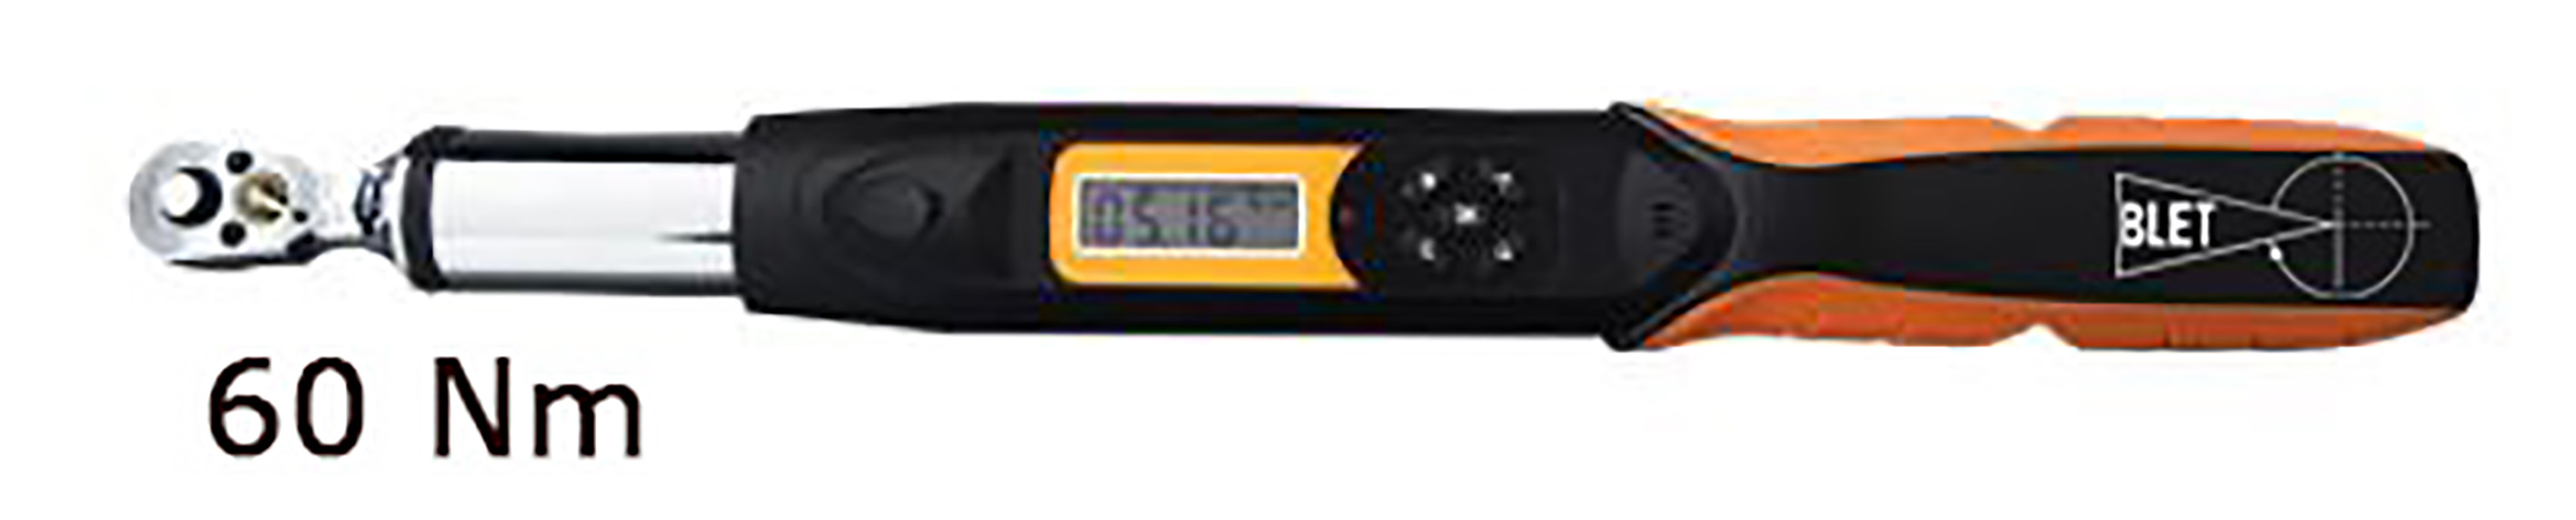 DIGITAL TORQUE WRENCH WITH COMMUNICATION 60 Nm READING 0,01 Nm SIZE 3/8" BLET<br>Ref : CLET5-CDP06038